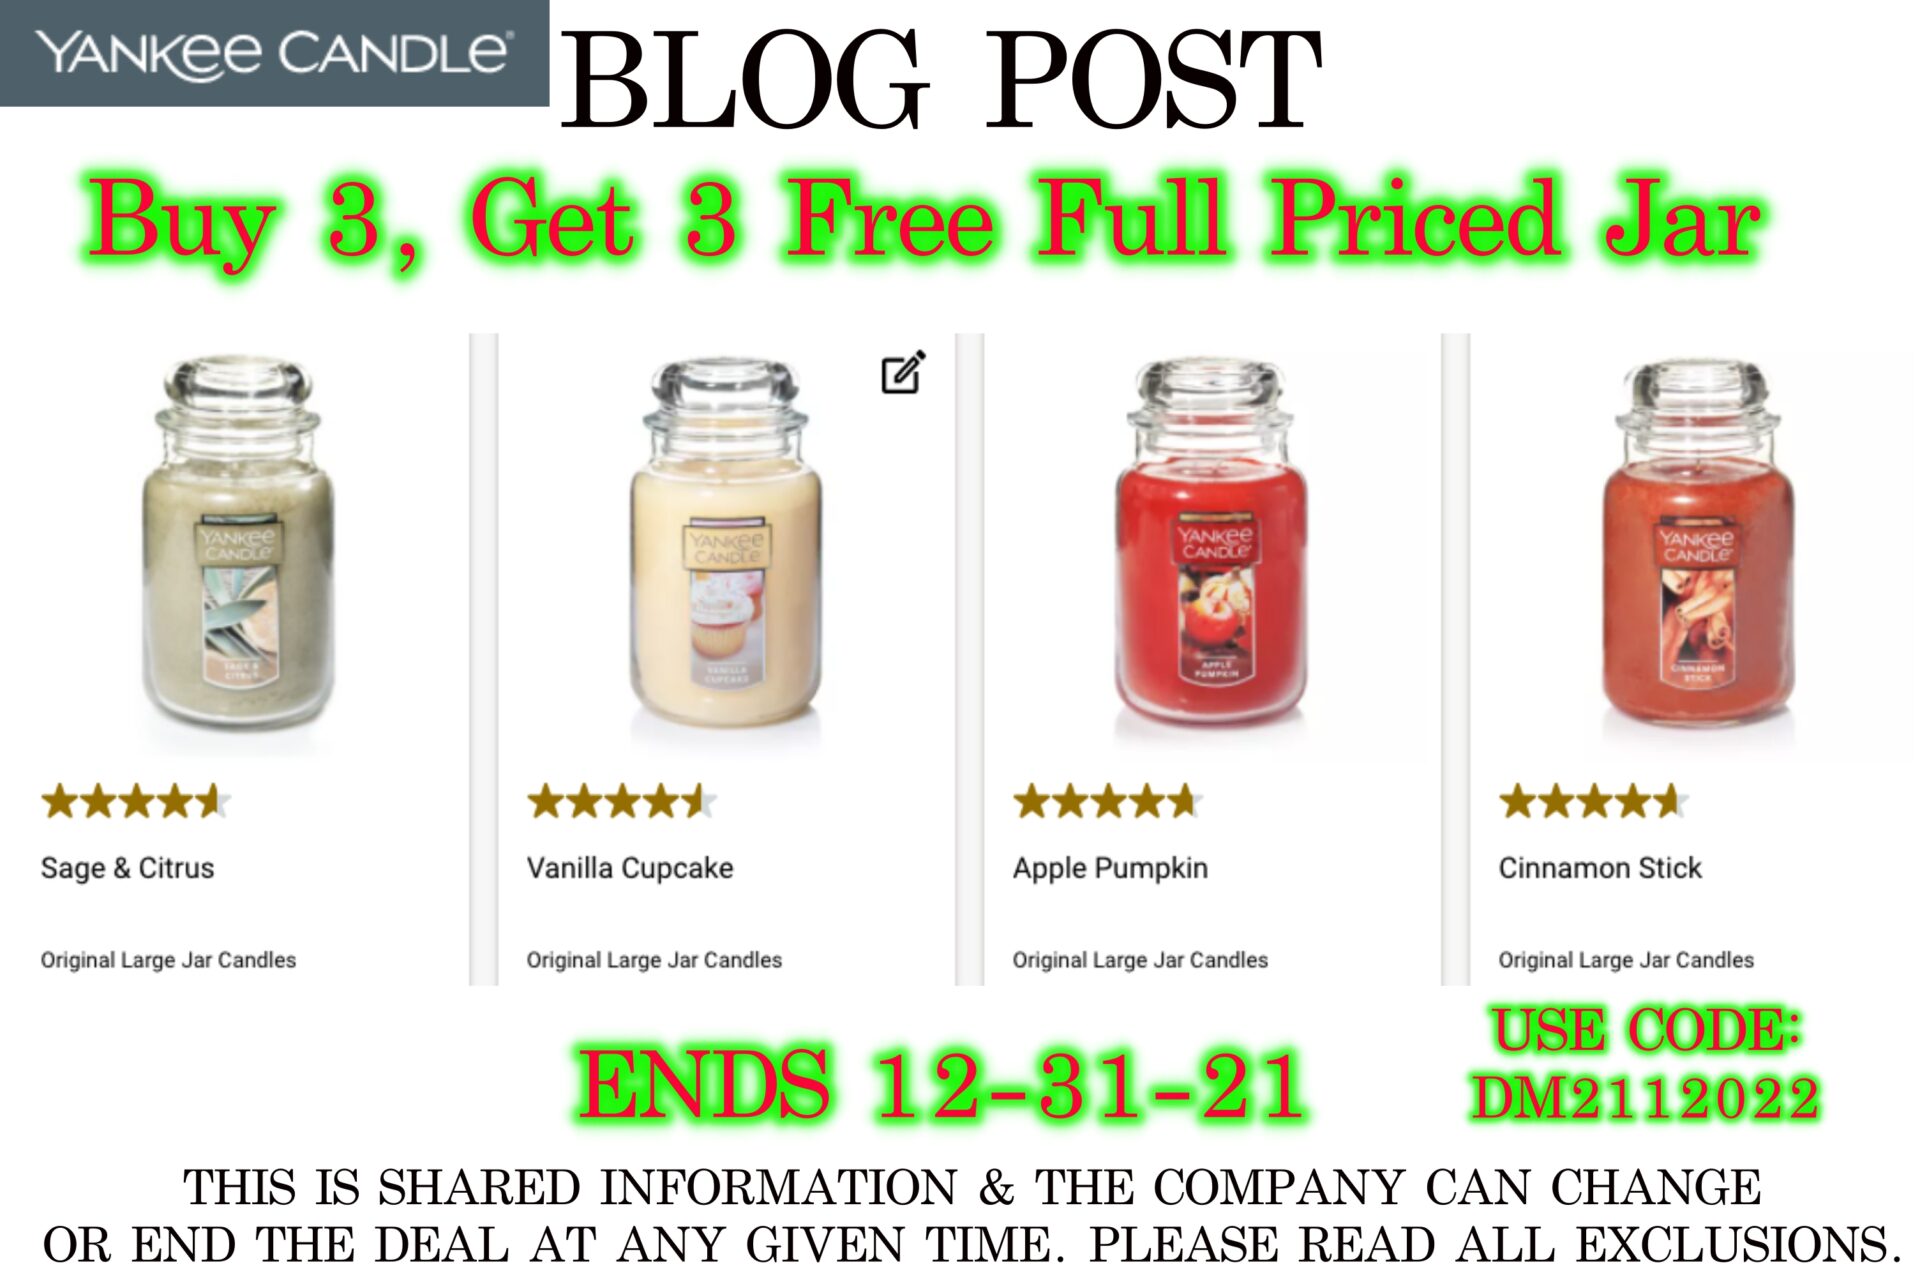 YANKEE CANDLE BUY 3 GET 3 FULL PRICED ENDS 123121 Hot Bogos